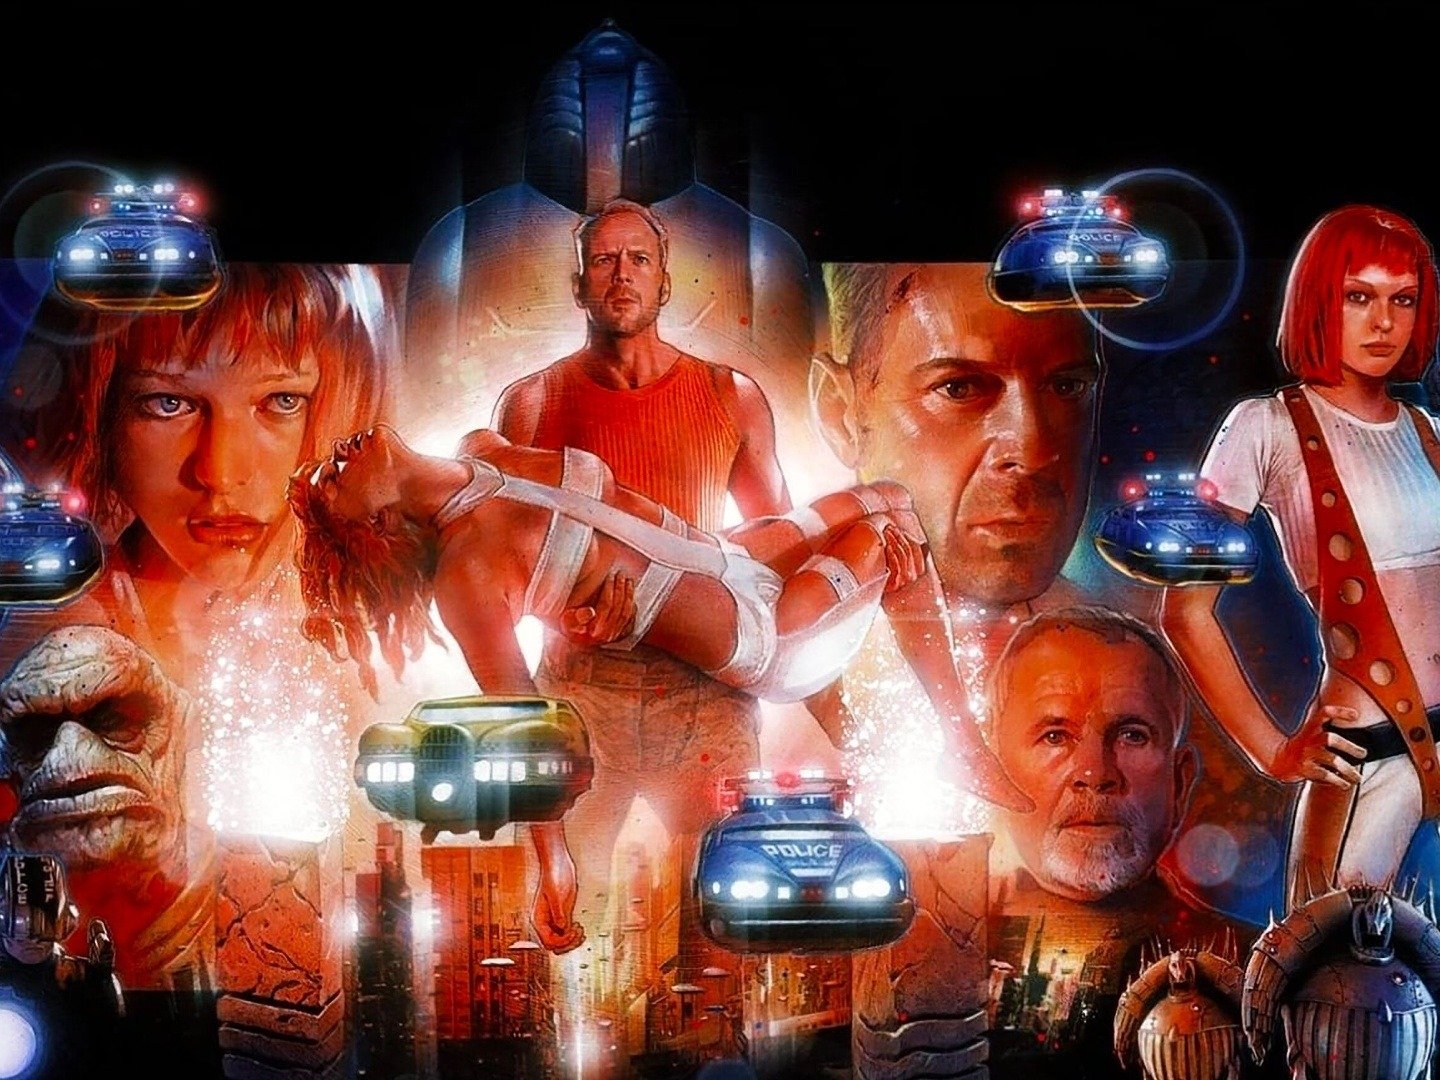 2. "The Fifth Element" (1997) - wide 4